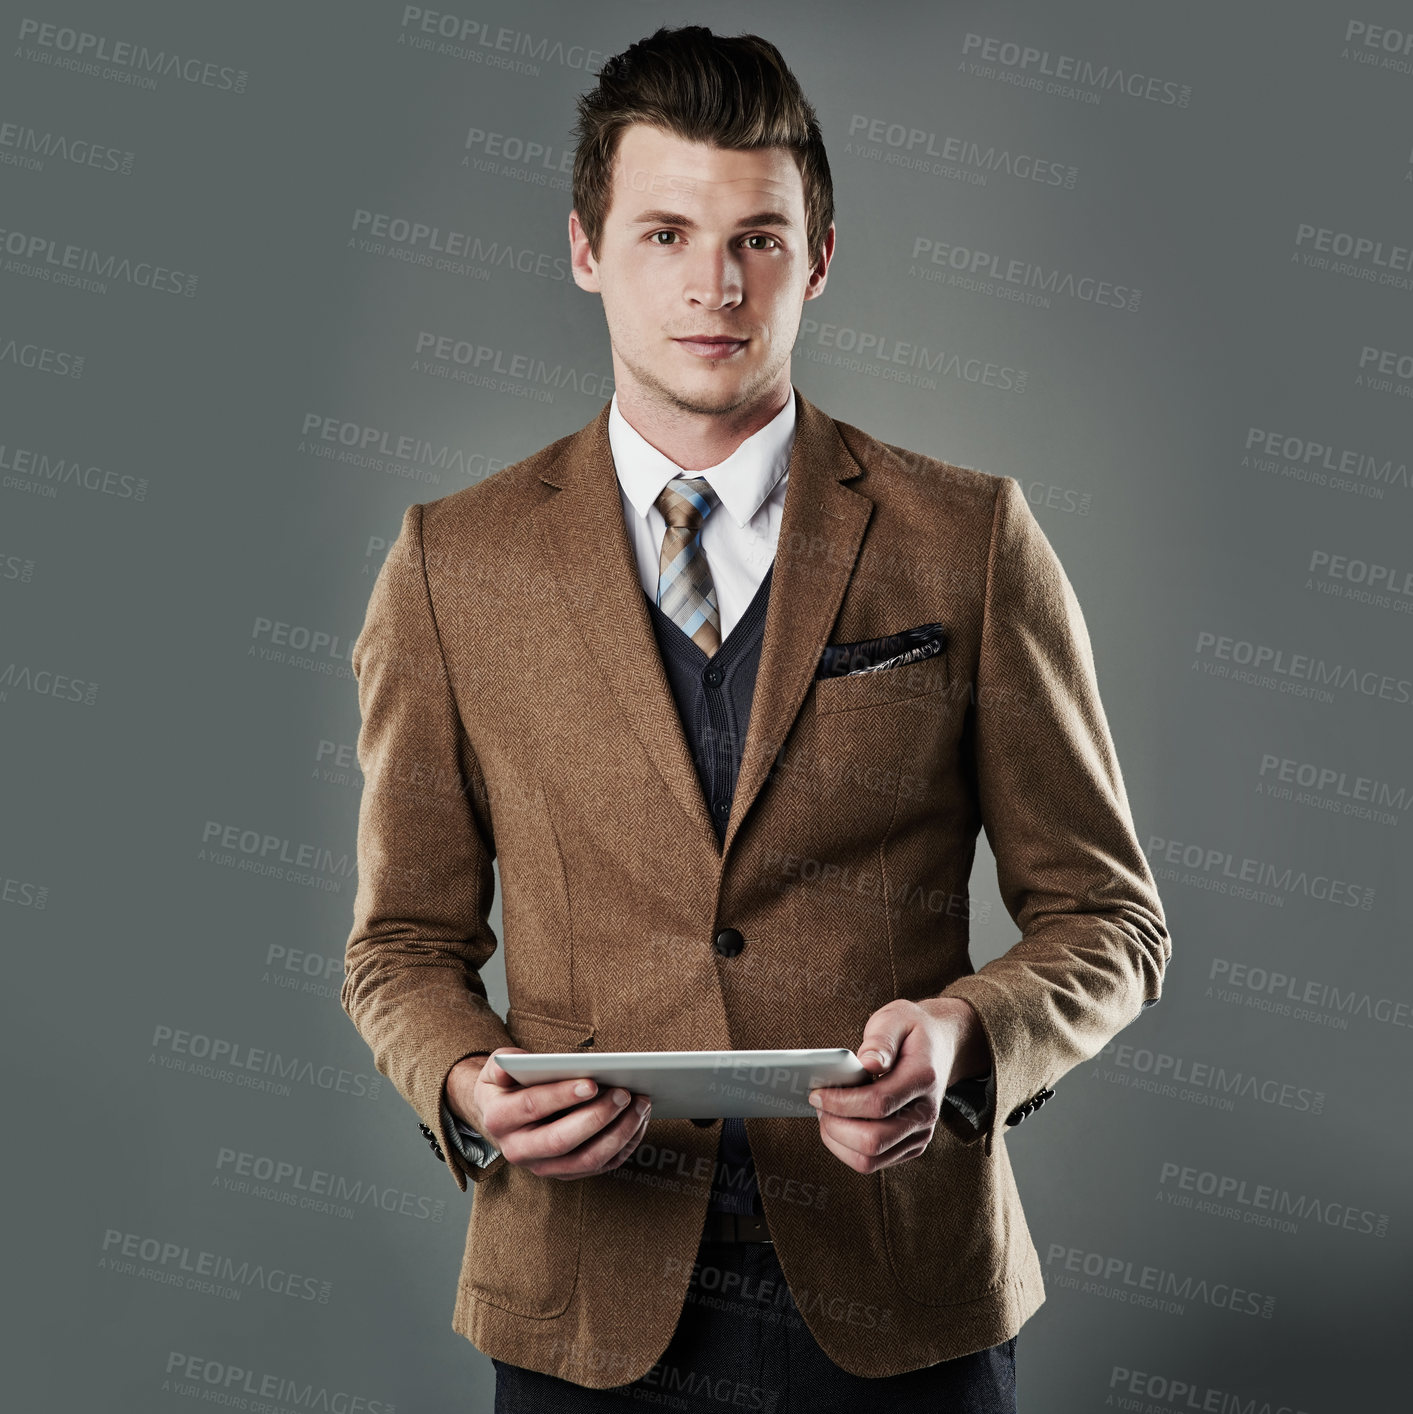 Buy stock photo Studio shot of a young businessman using his tablet against a grey background